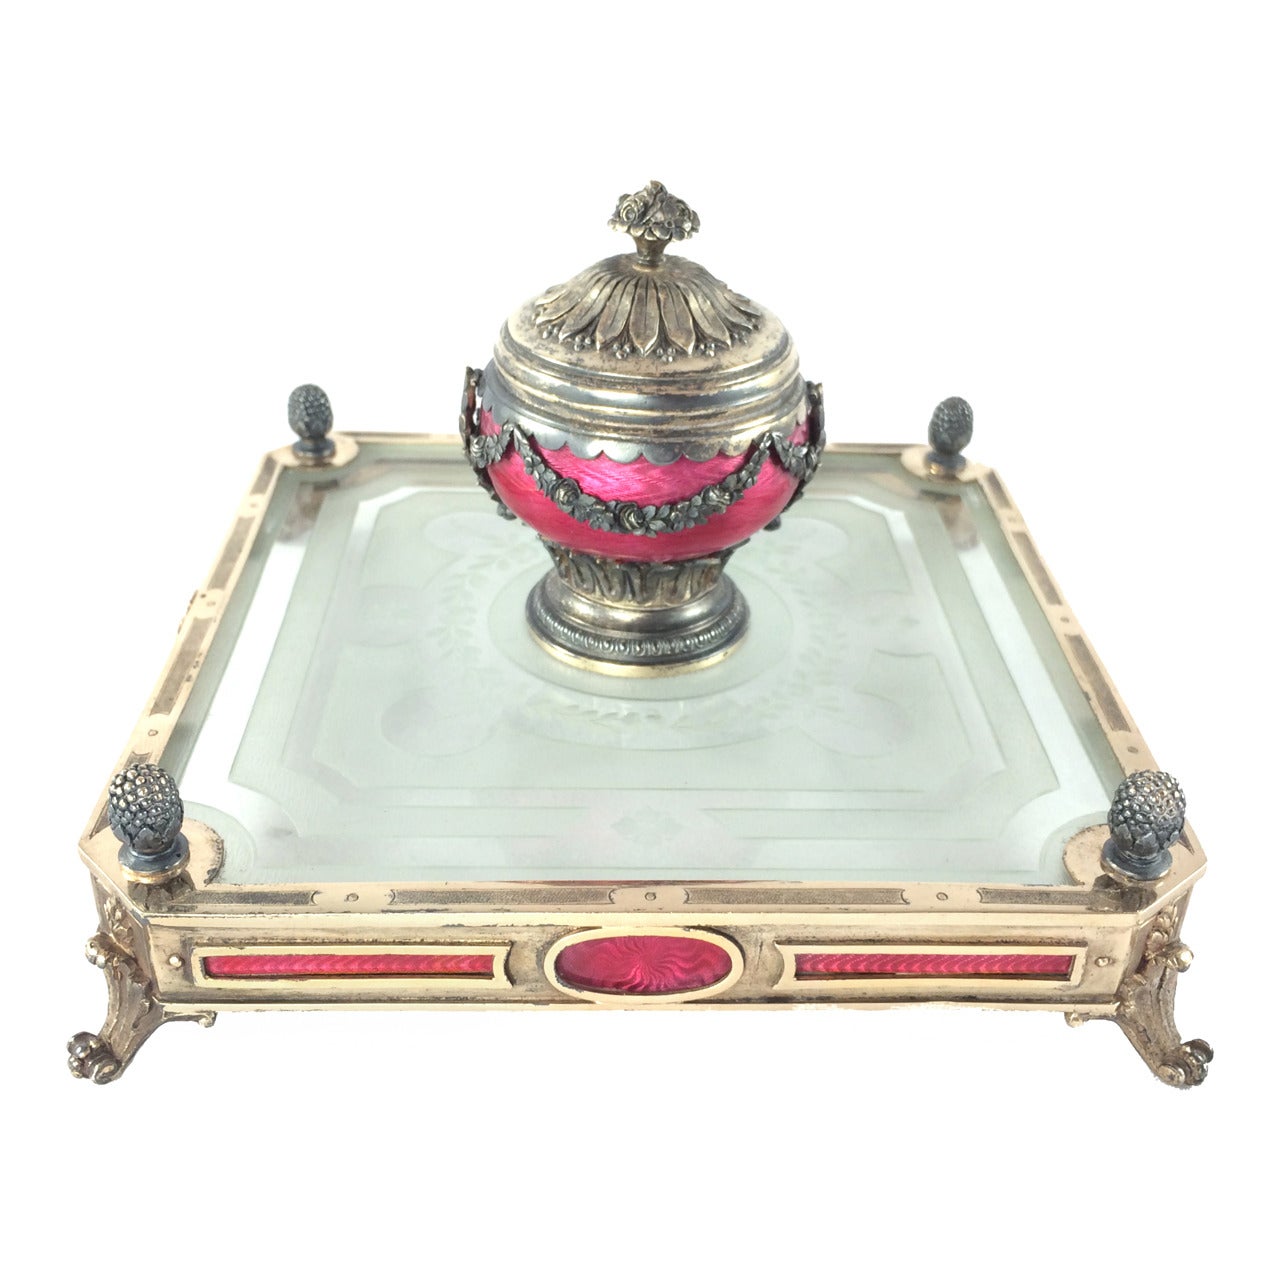 Early 20th Century French Guilloché Enamel and Gilt Silver Inkwell For Sale